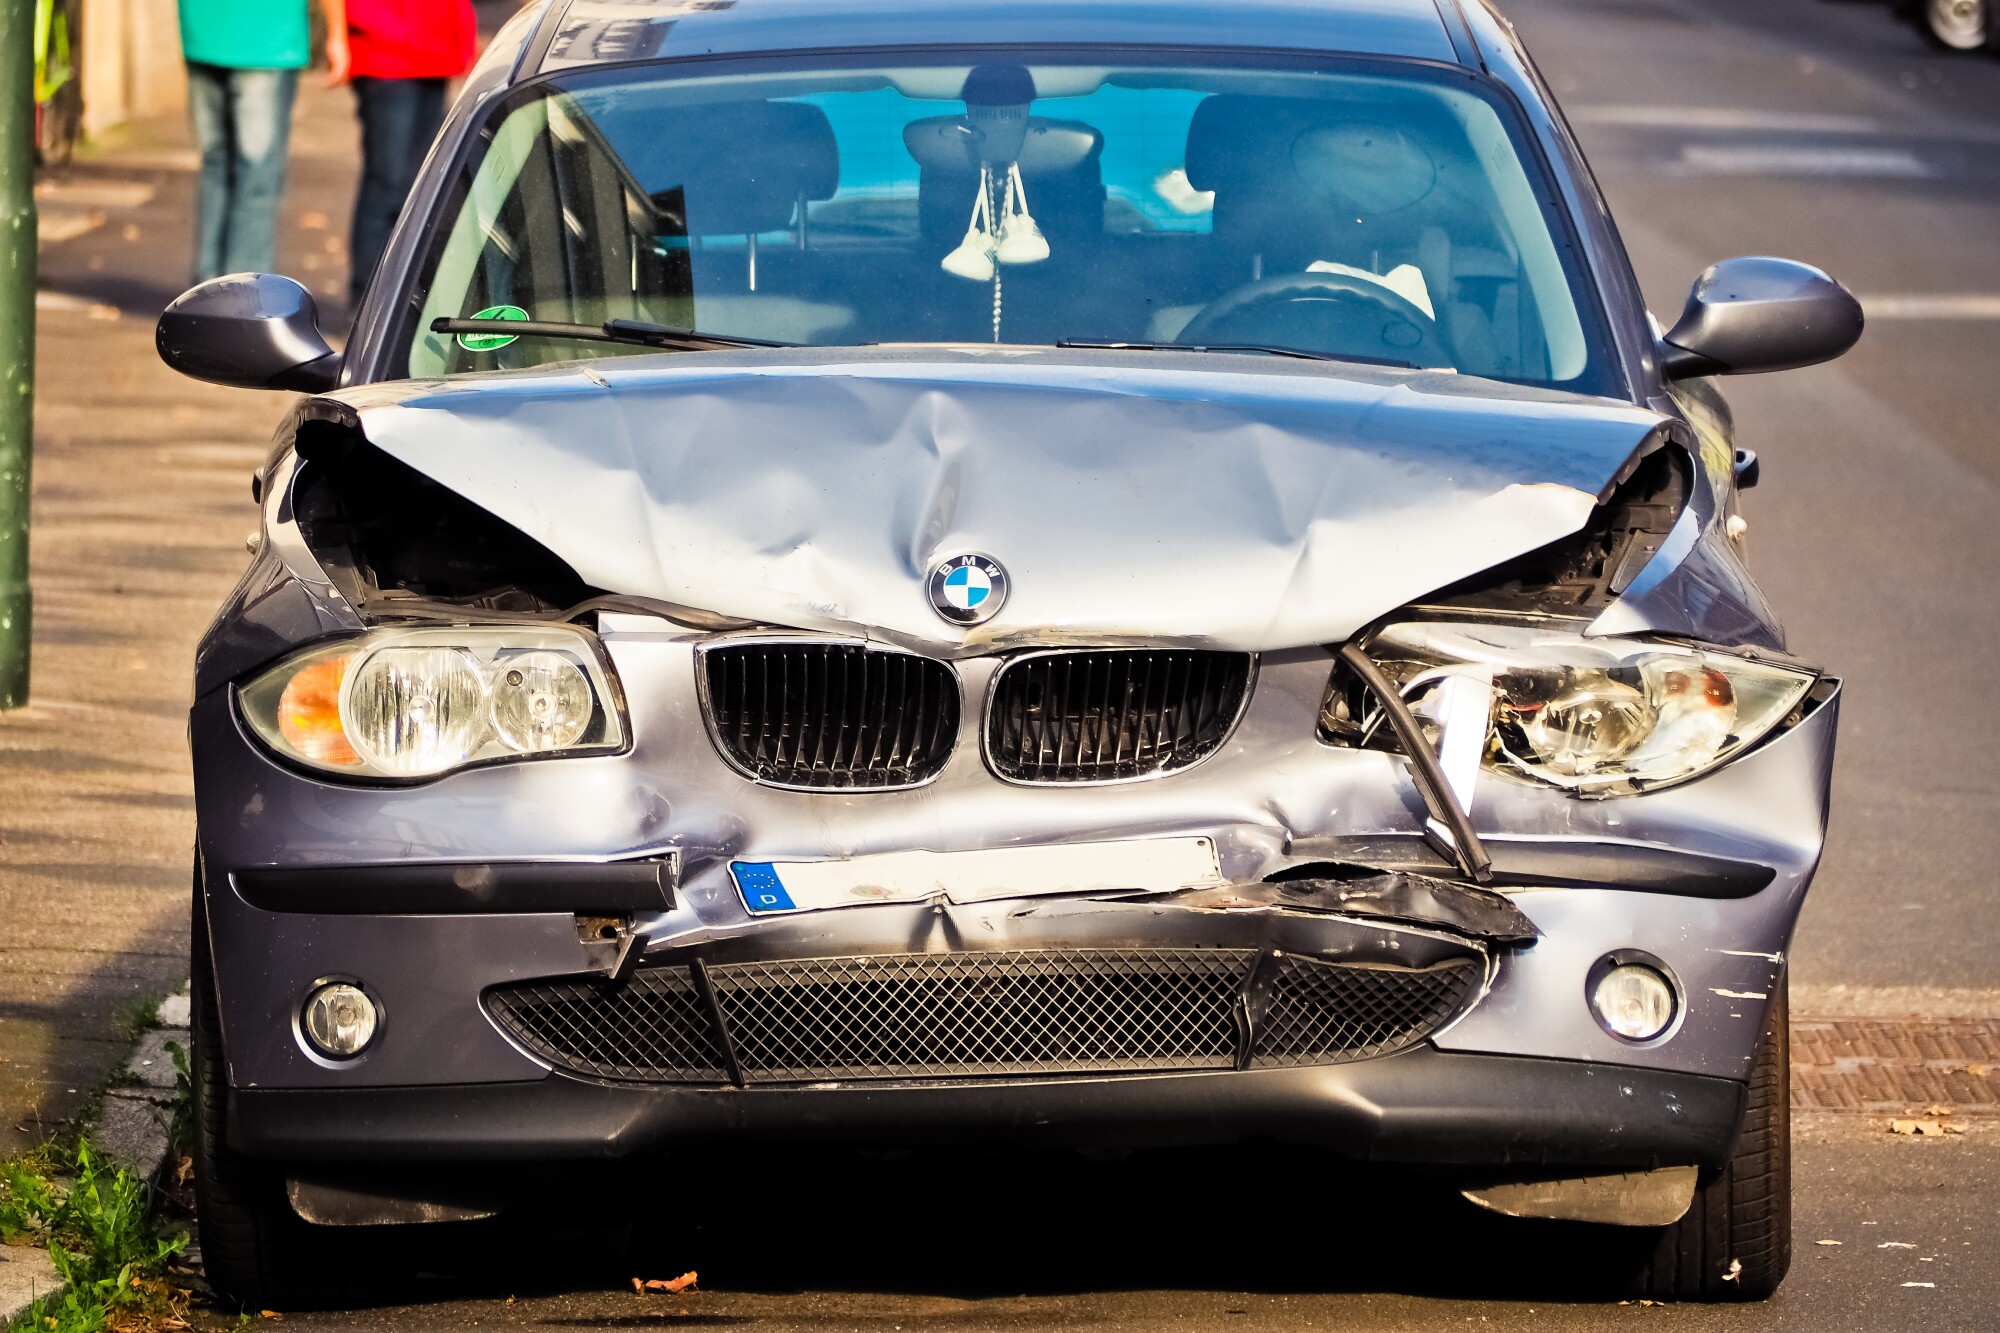 Post-Accident Considerations